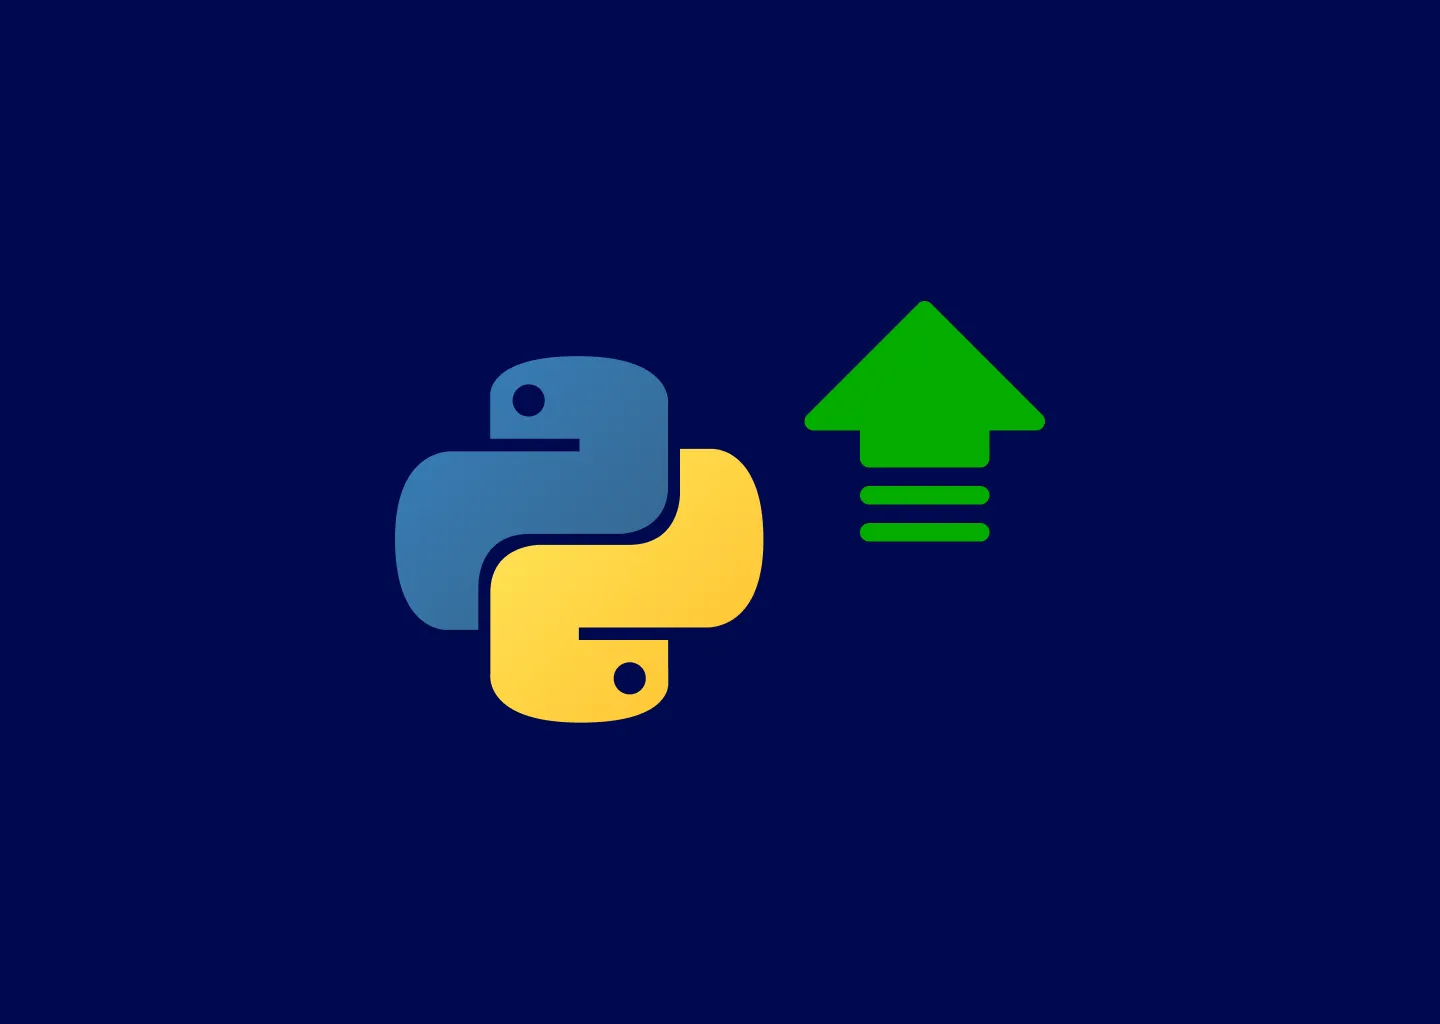 Python icon with a green arrow up